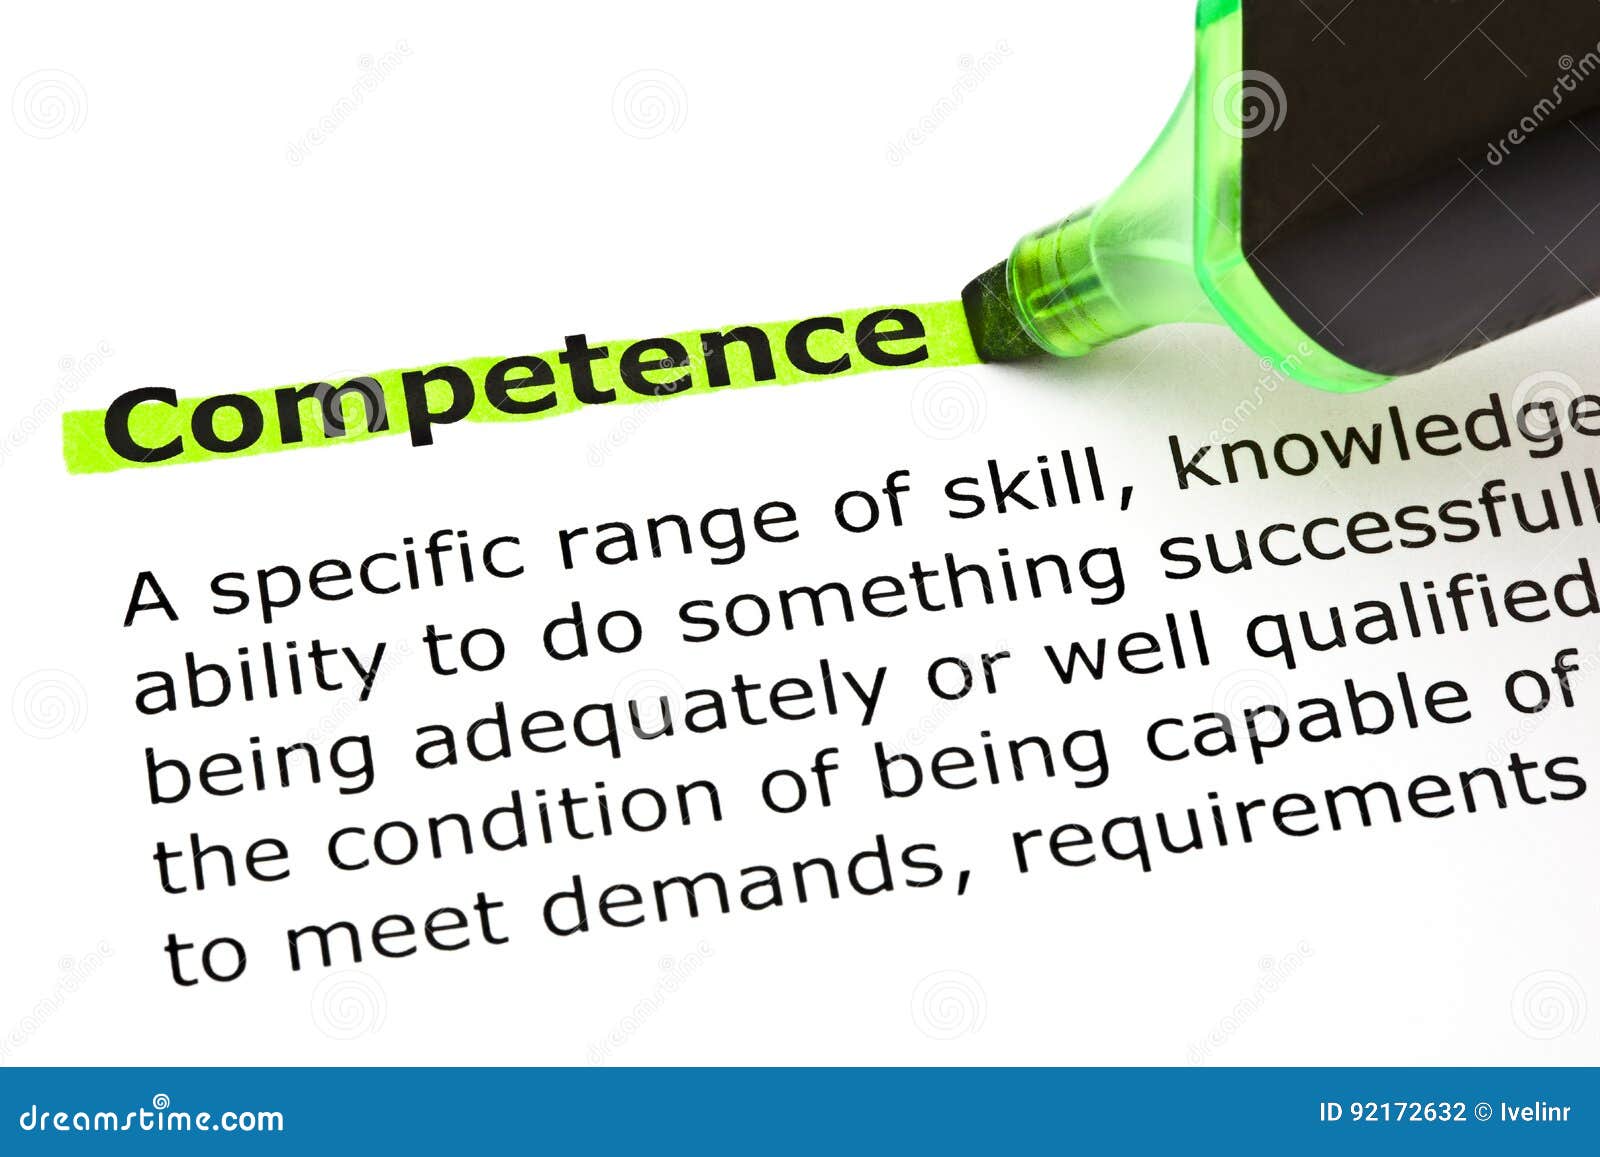 competence highlighted in green